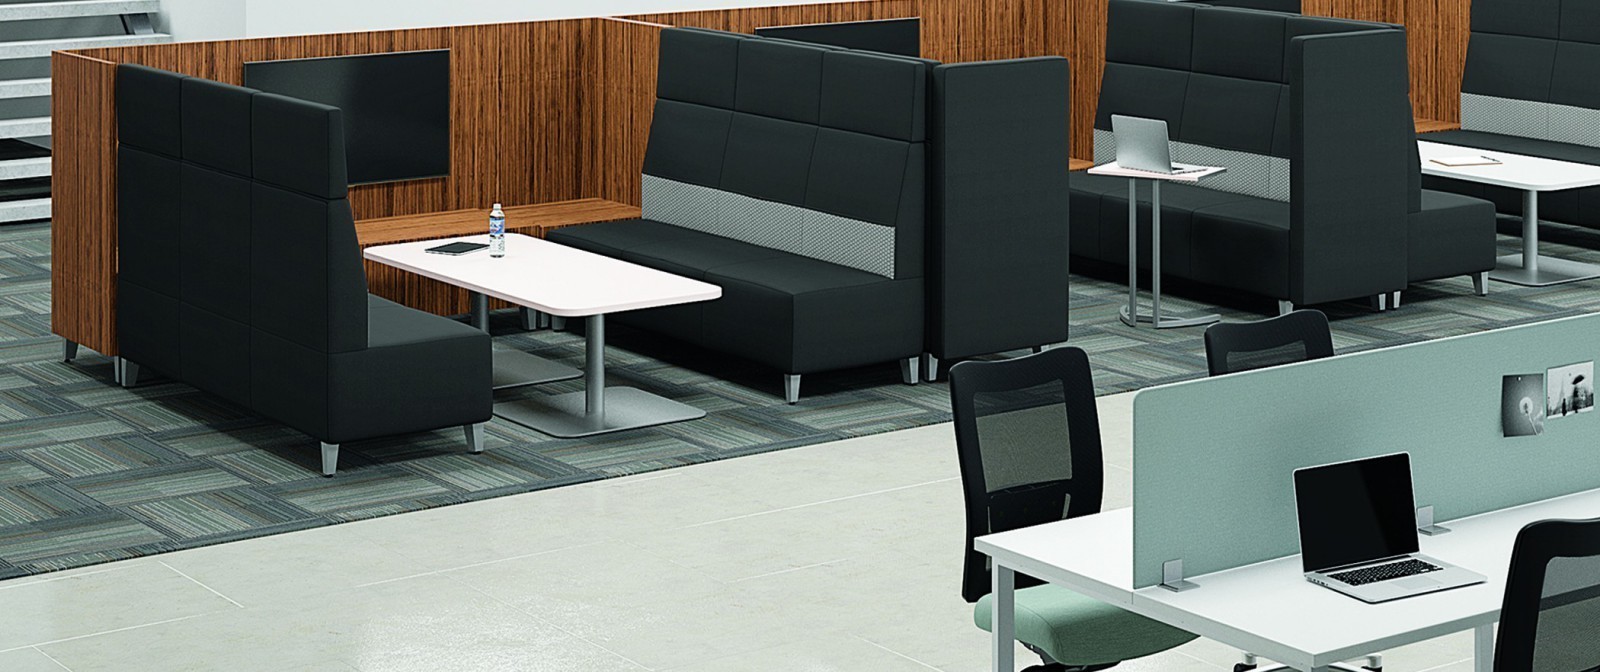 conference bench seating